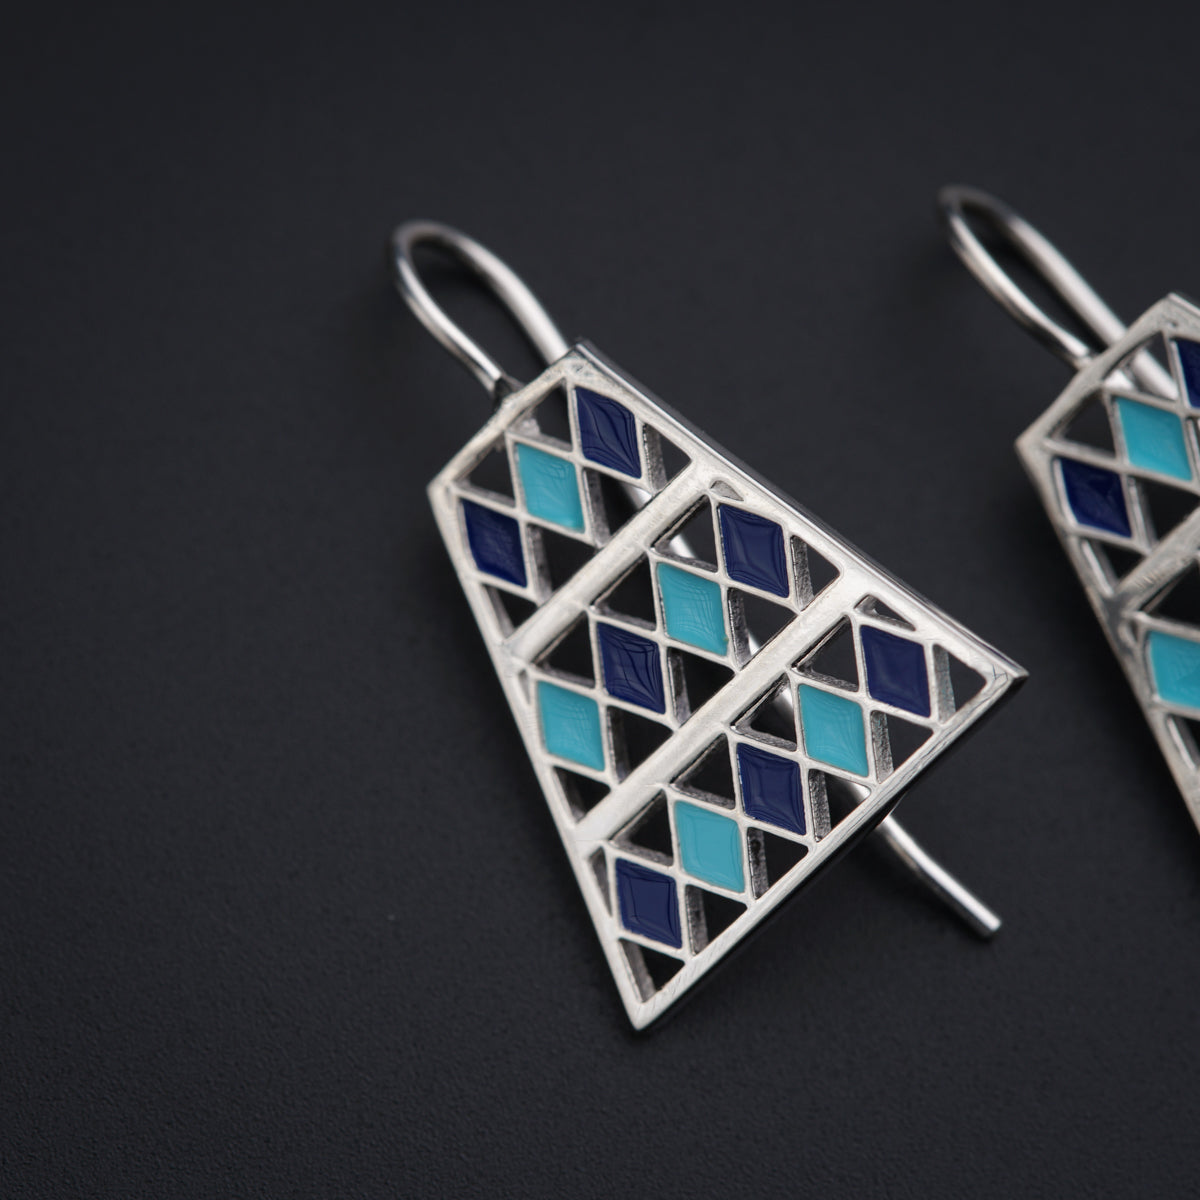 a pair of silver and blue earrings on a black surface